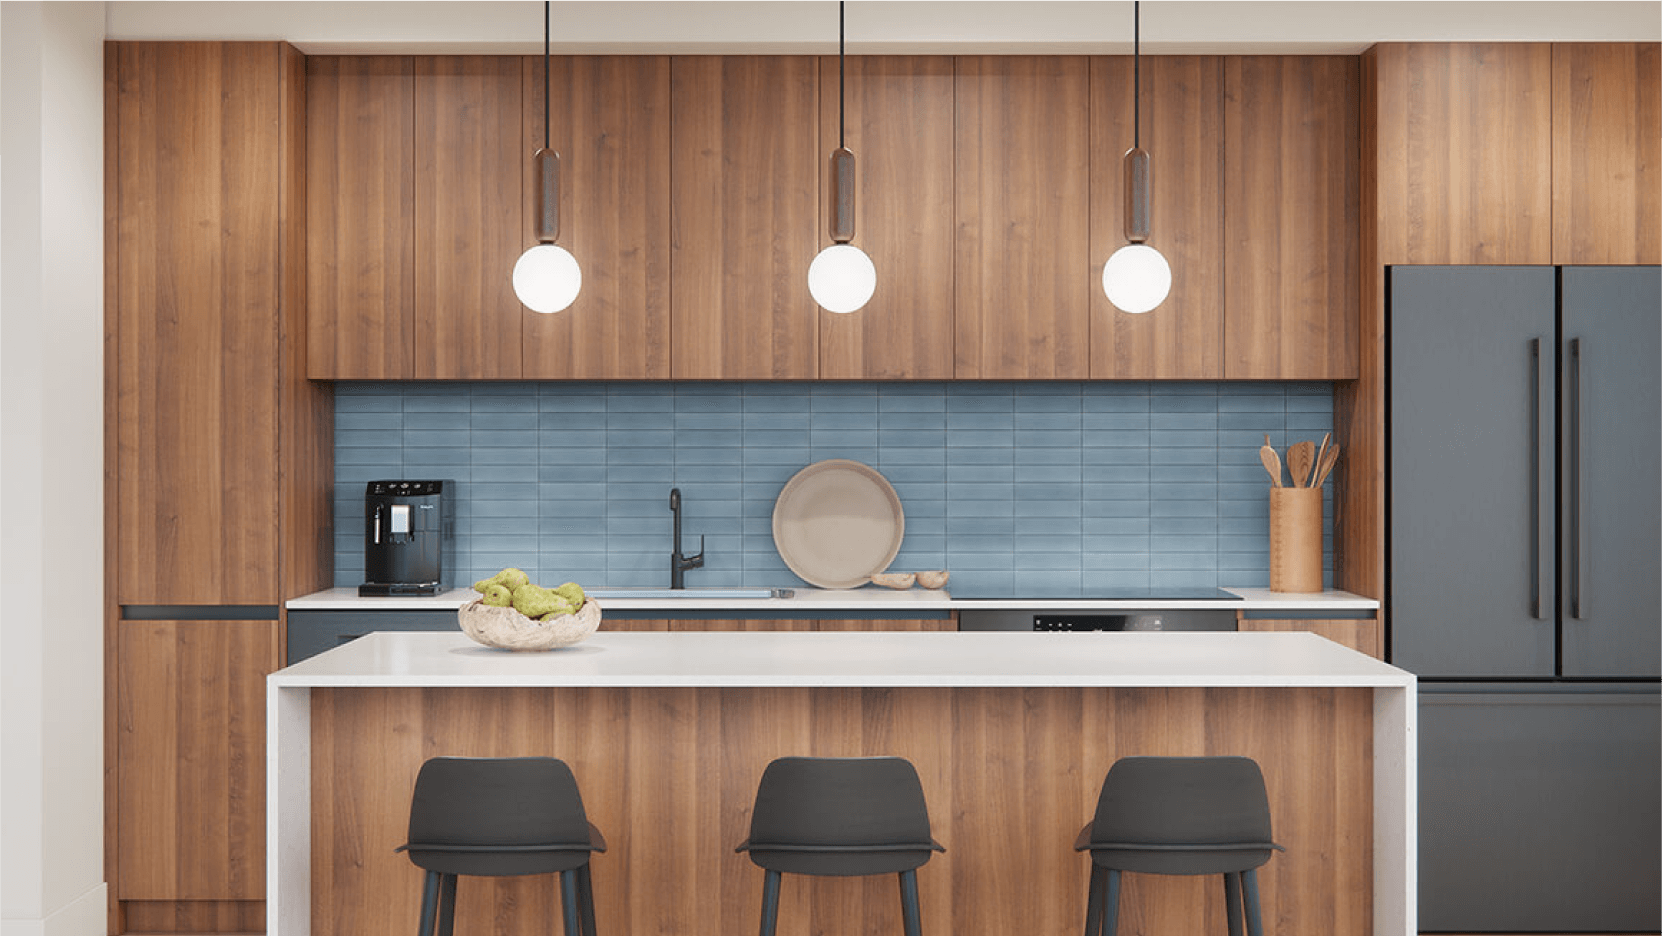 Contemporary kitchen in Vesper ATX condos with wooden cabinets, blue subway tile backsplash, and white pendant lighting over a breakfast bar.